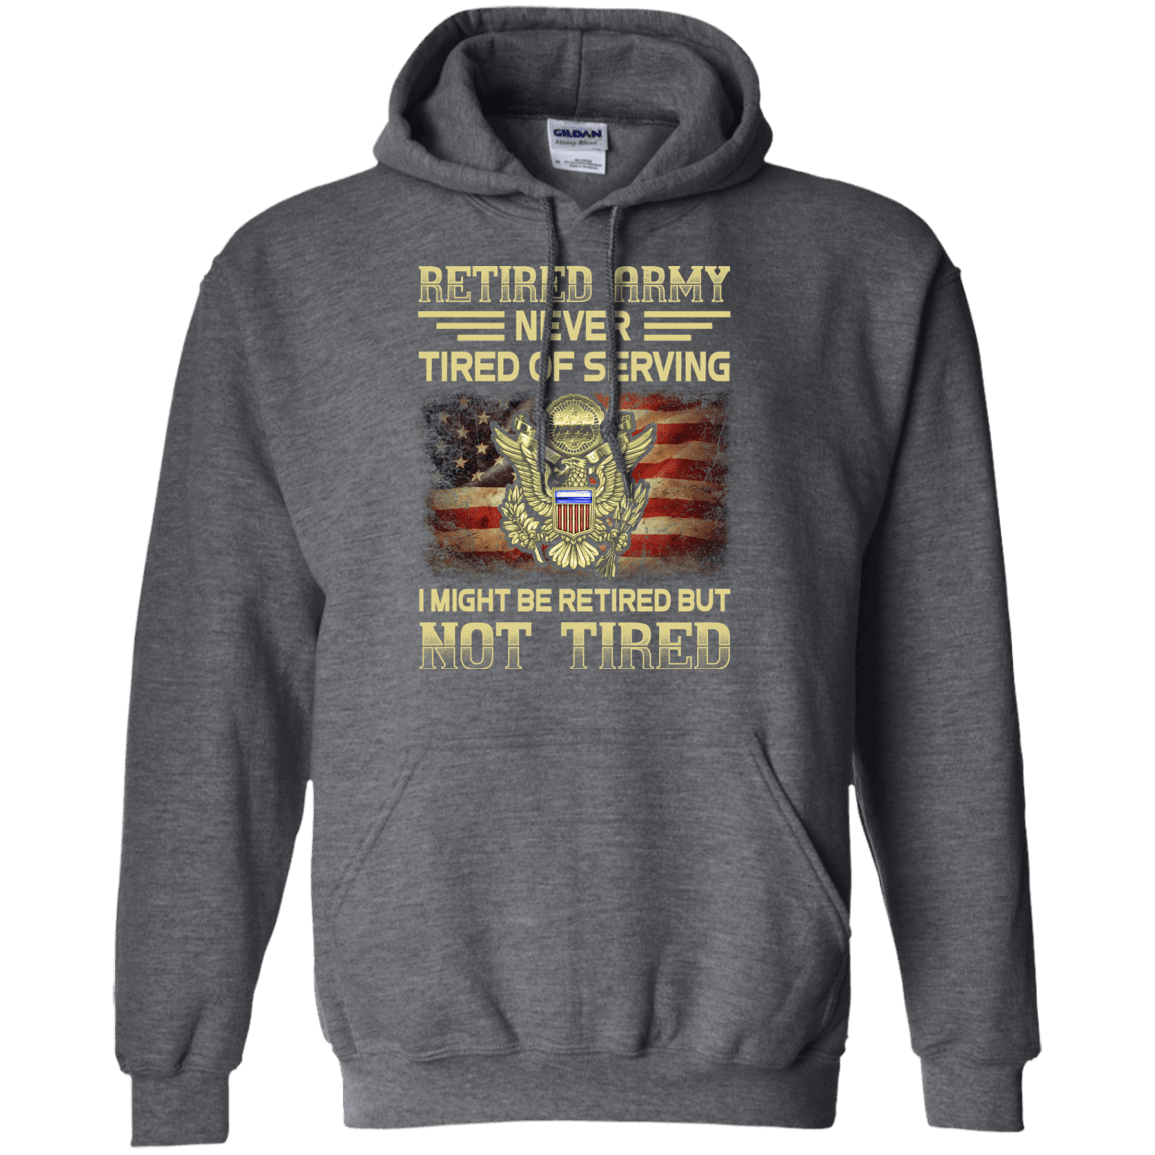 Retired Army Never Tired of Serving Front T Shirts-TShirt-Army-Veterans Nation